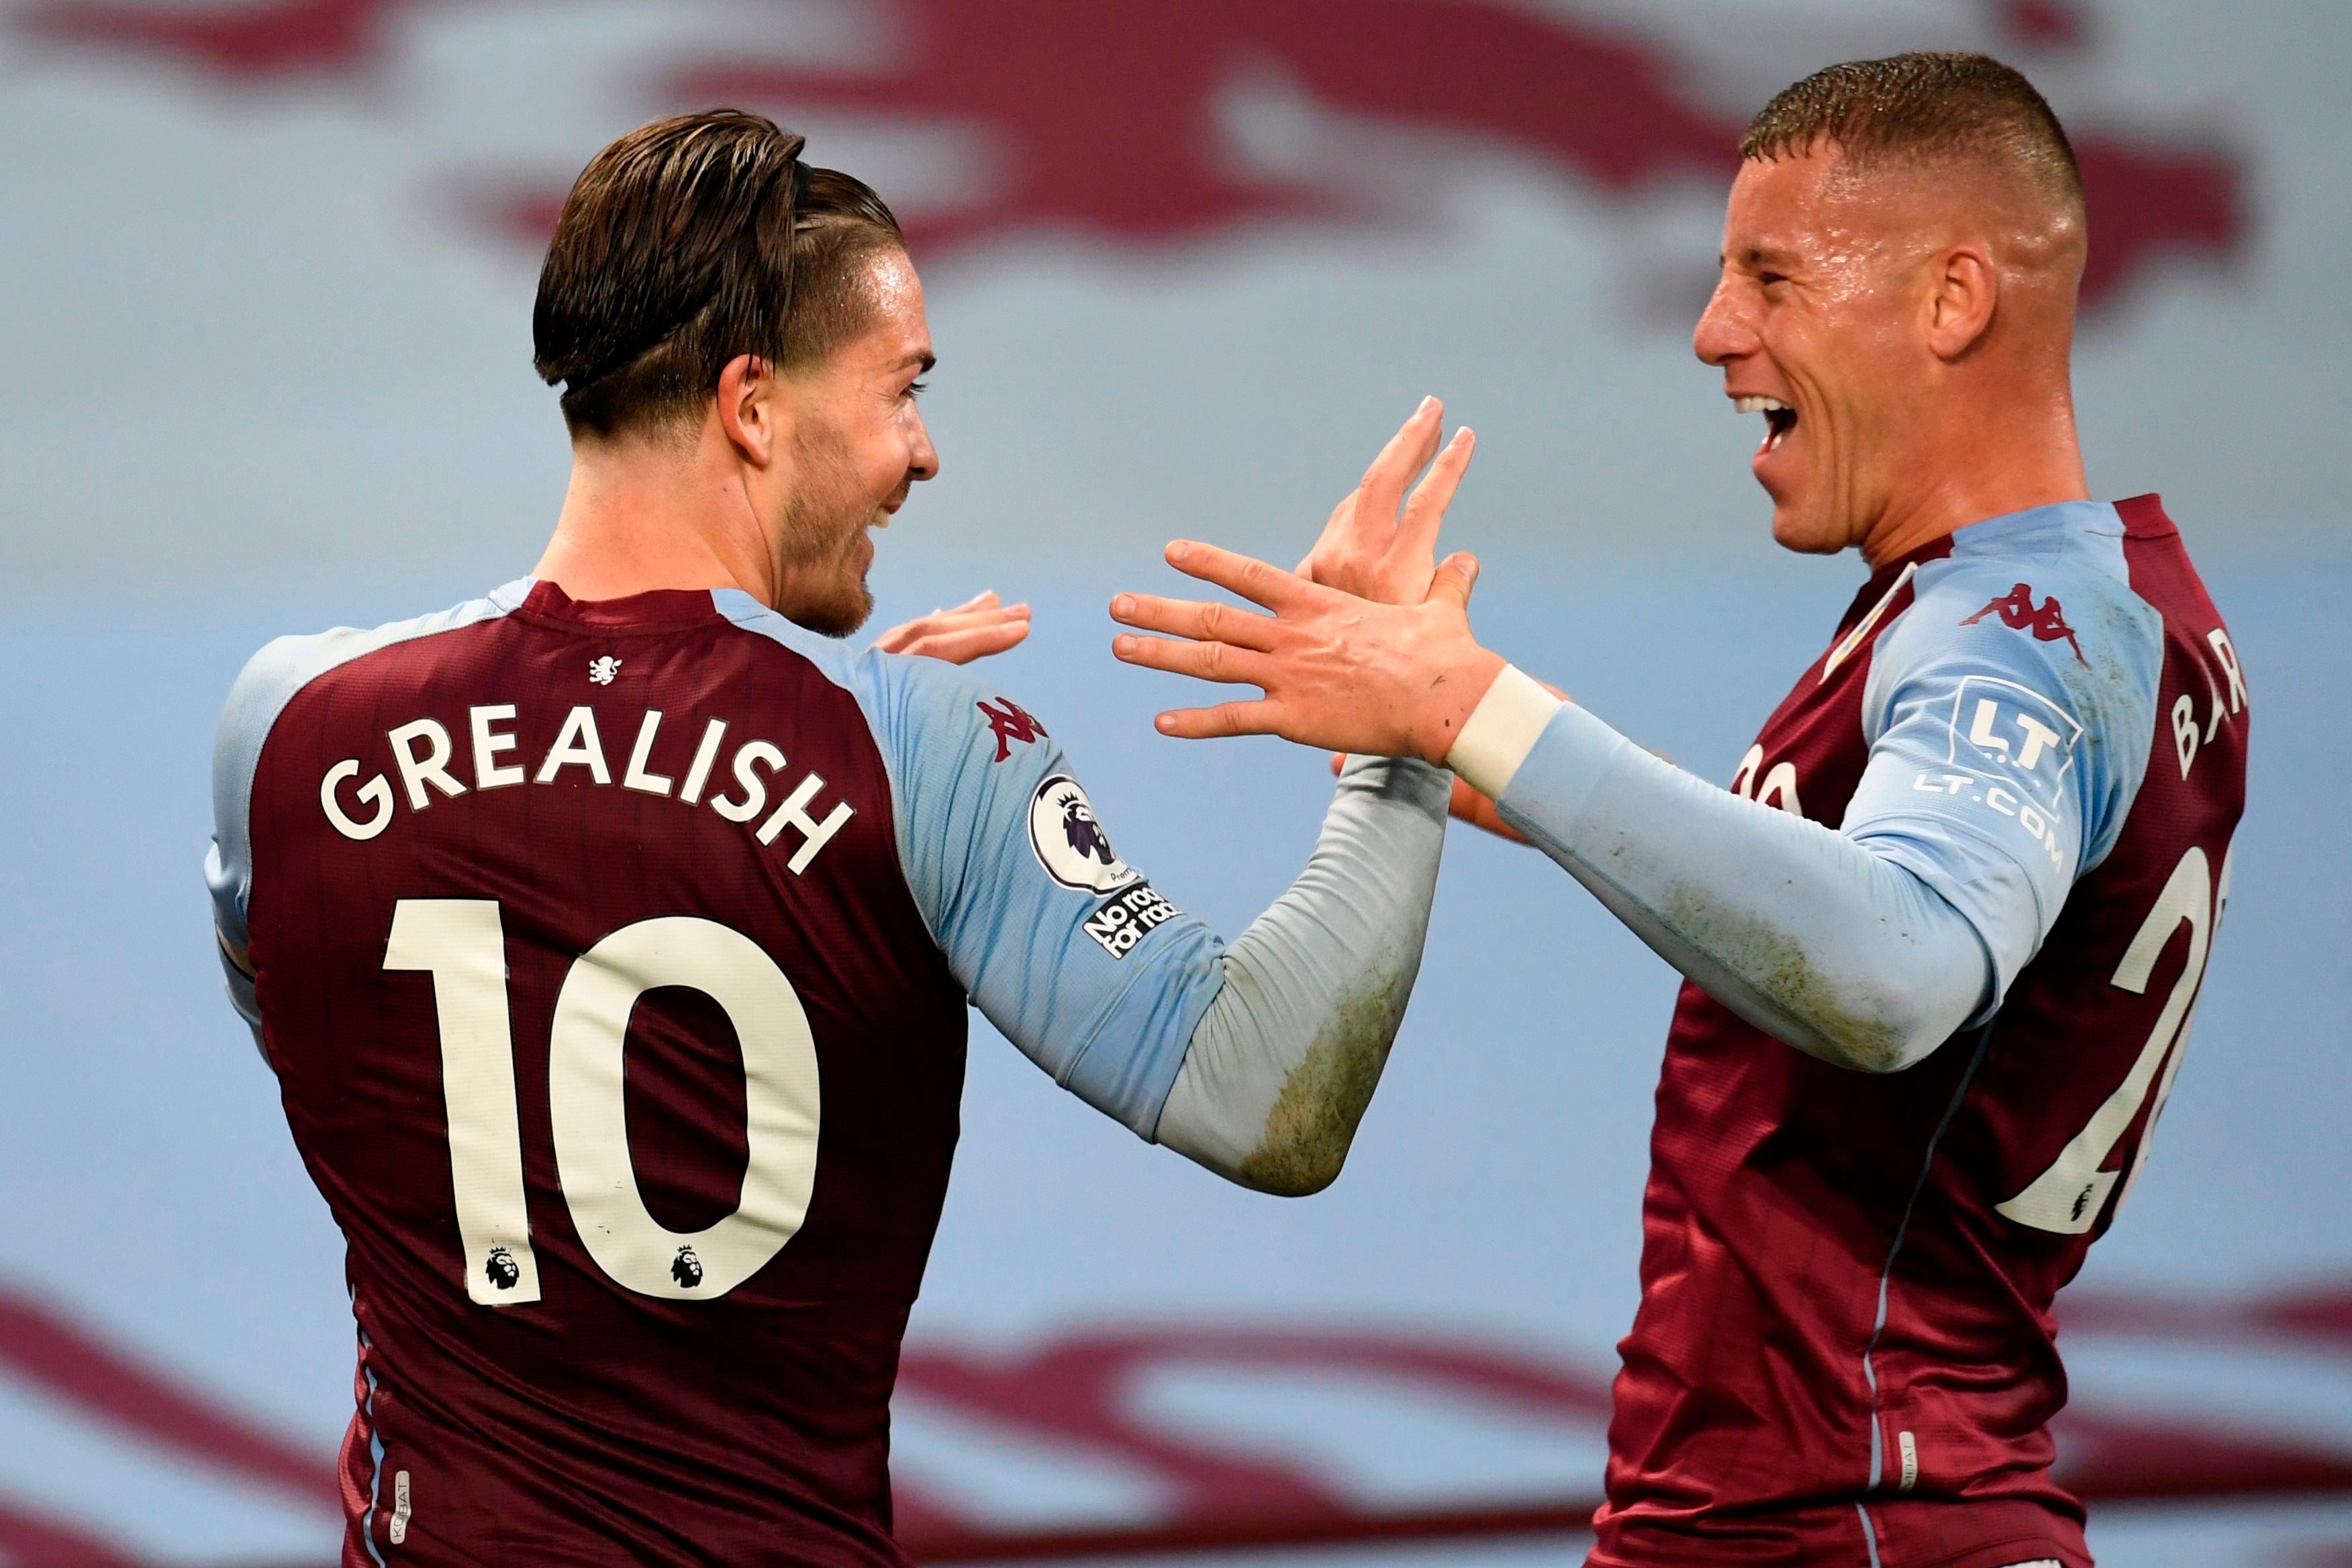 Jack Grealish and Ross Barkley will avoid club punishment after breaking coronavirus restrictions